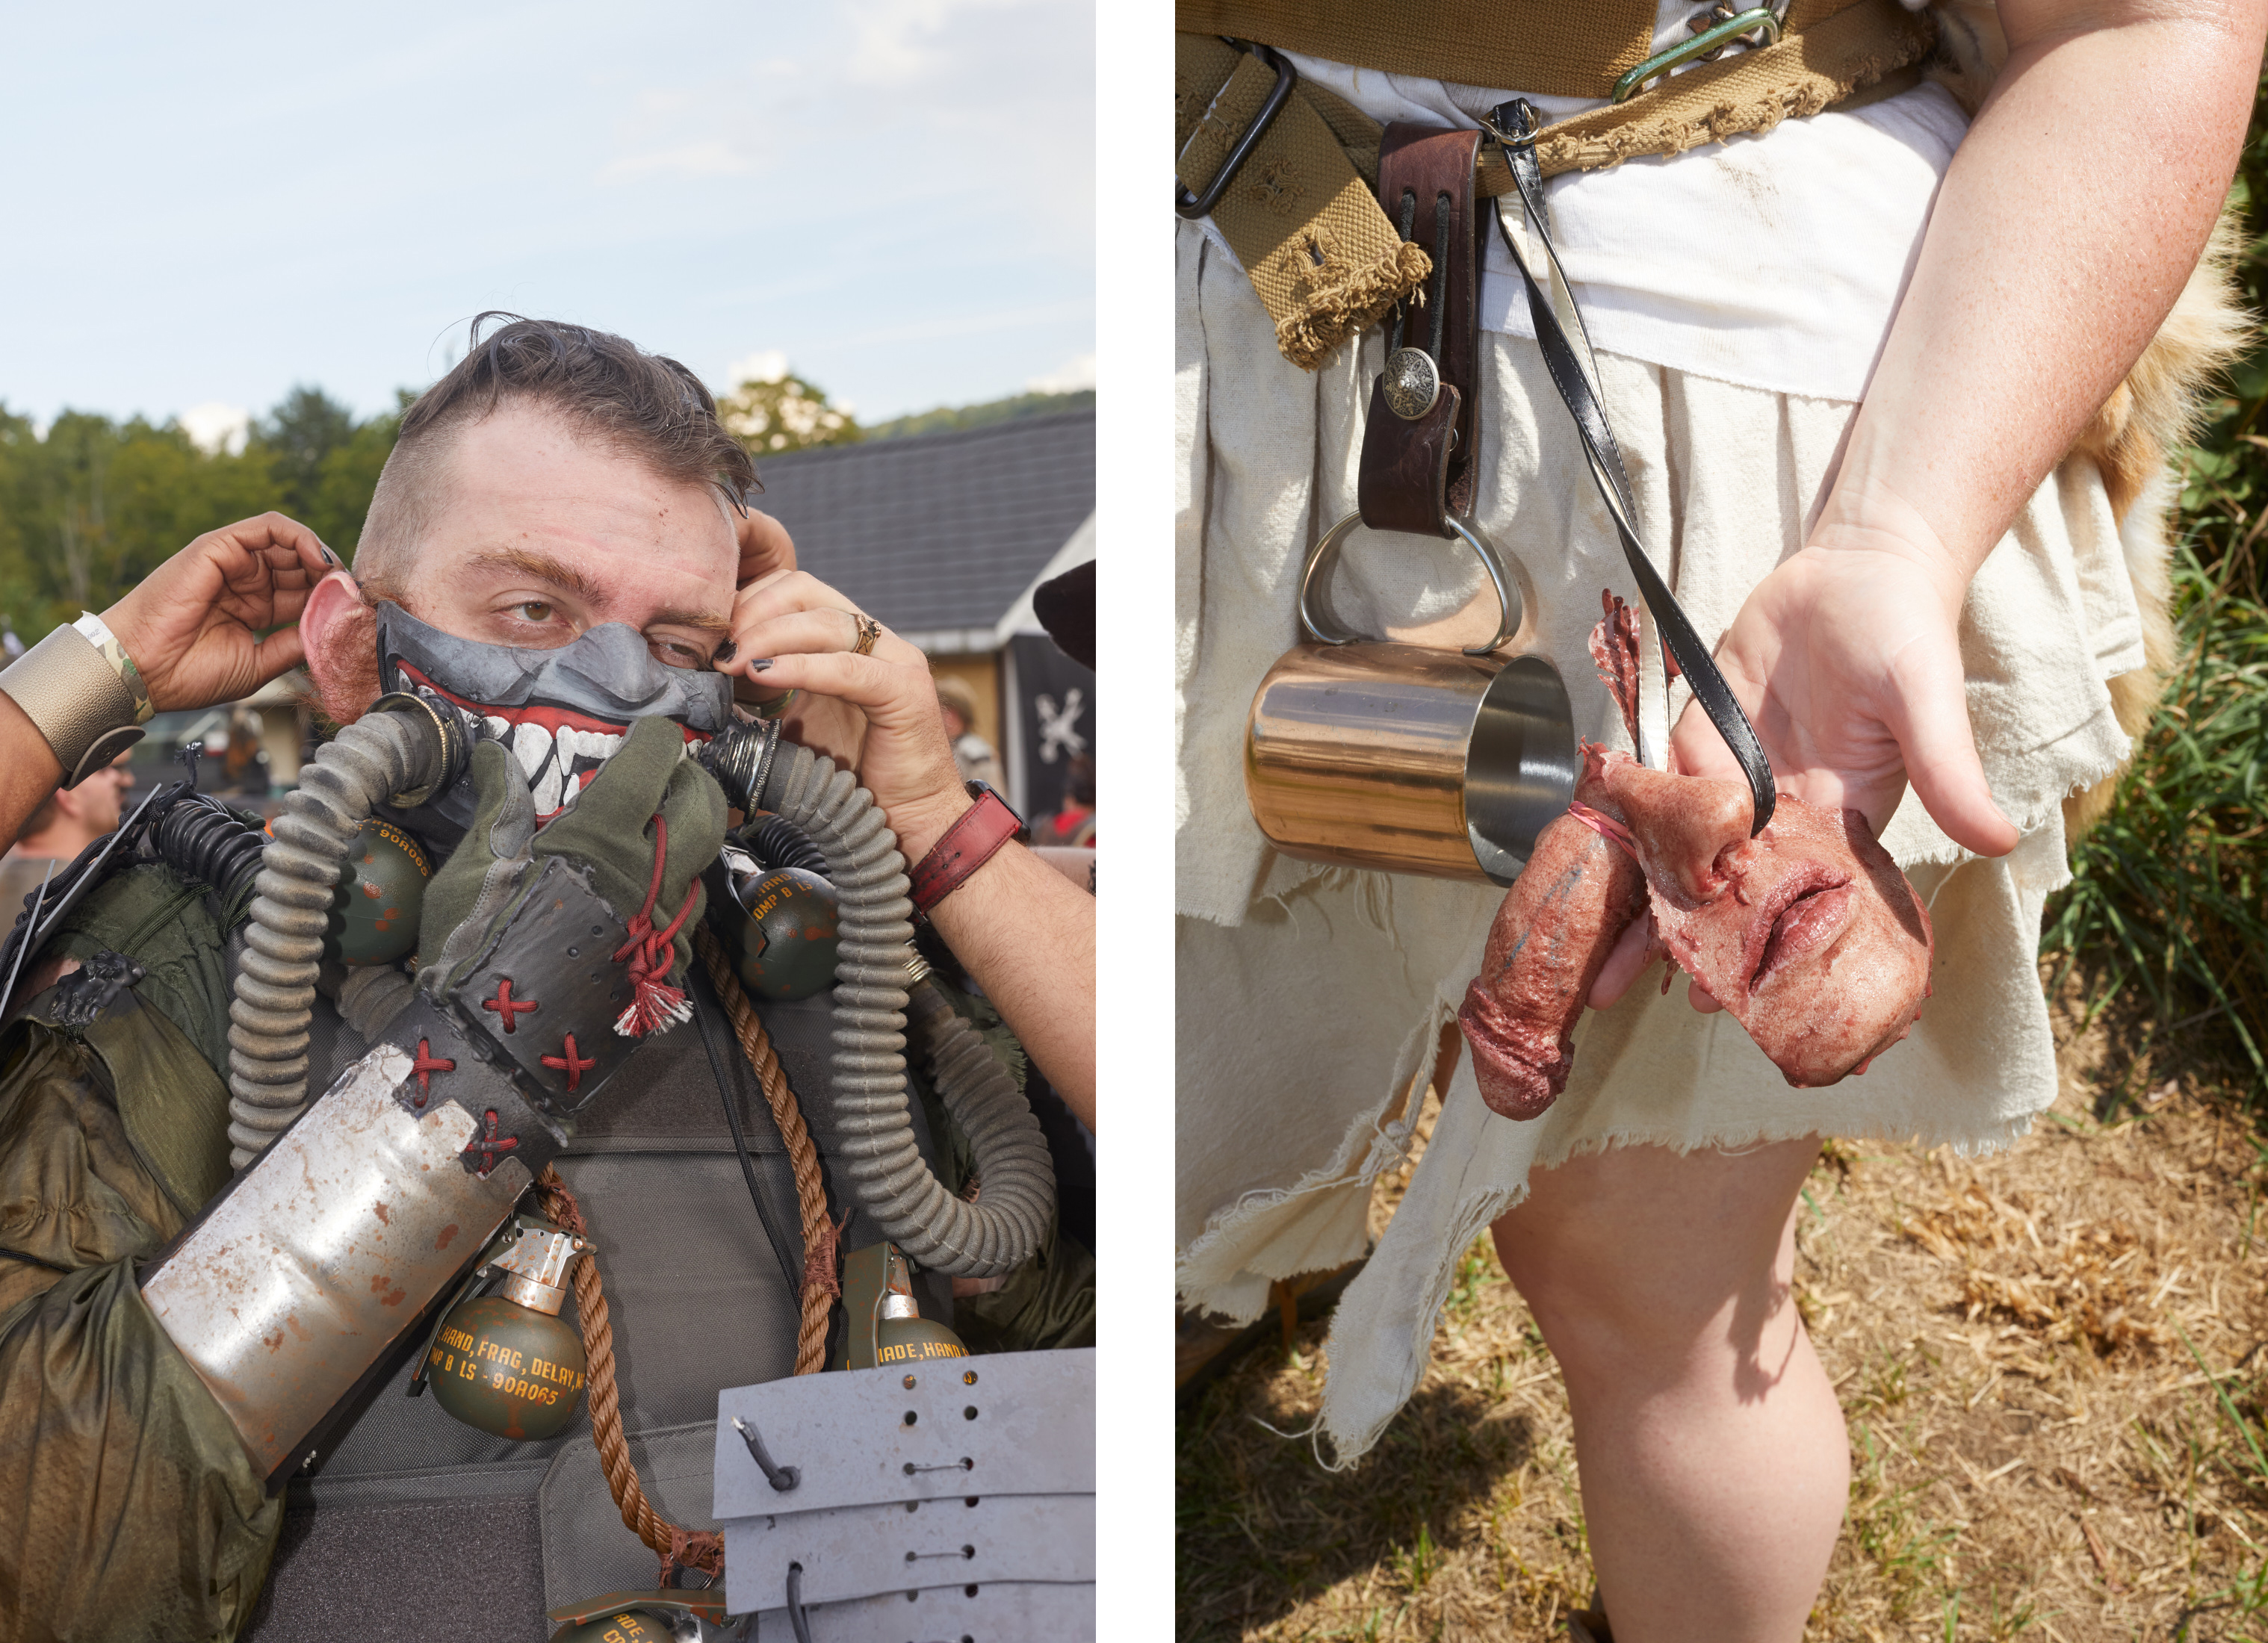 L: A man getting help putting on a prop gas mask. R: A woman shows her prosthetic severed penis, nose, and mouth.